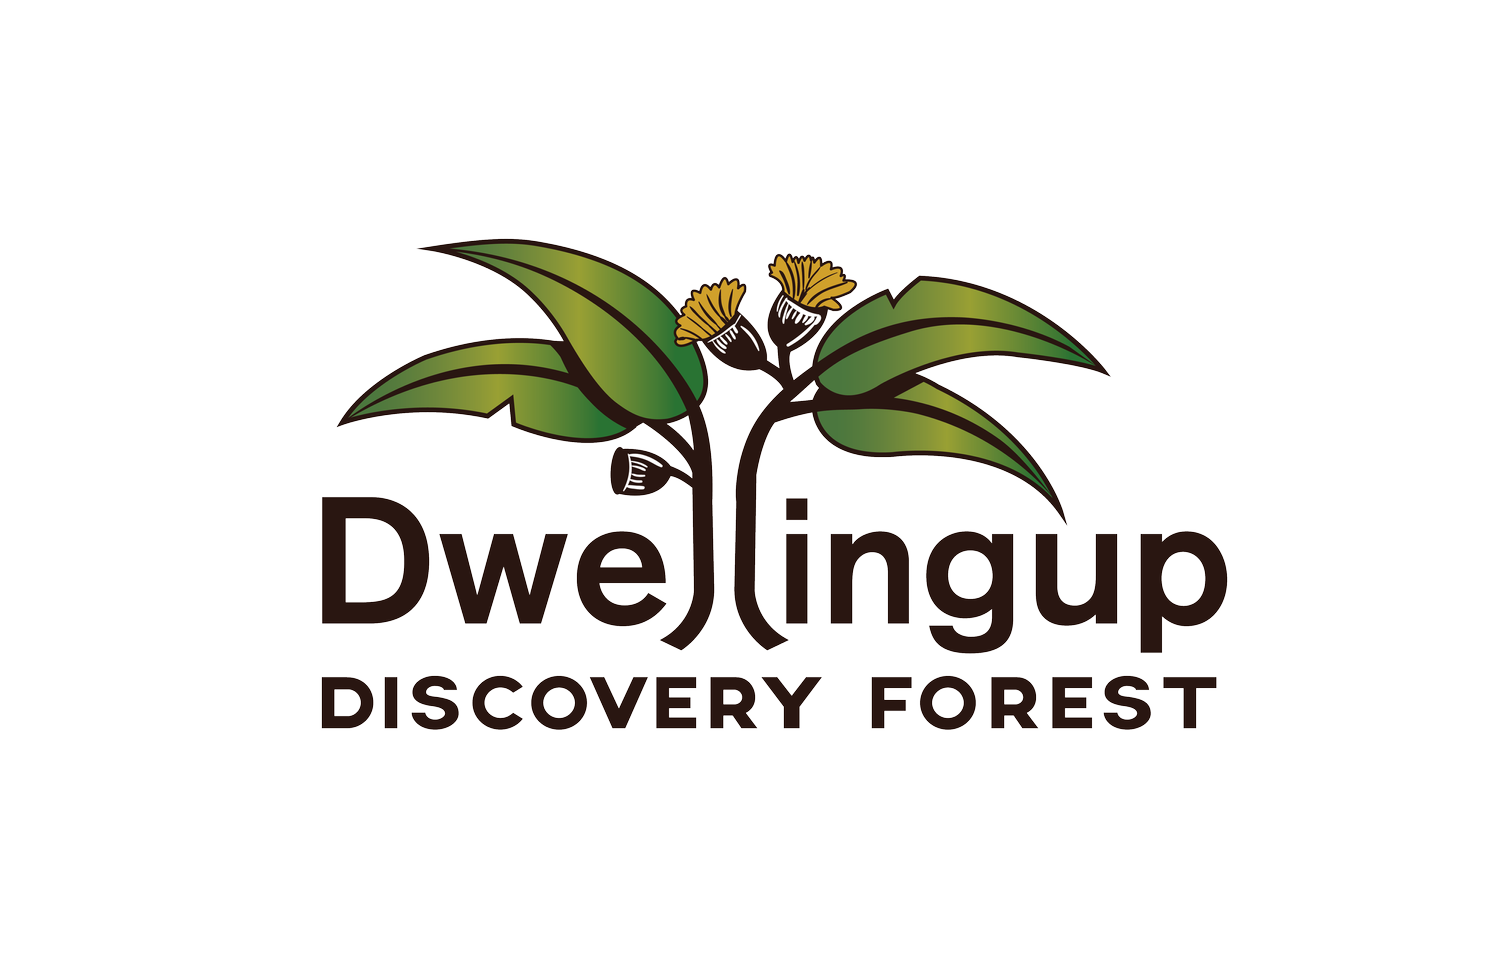 DWELLINGUP DISCOVERY FOREST